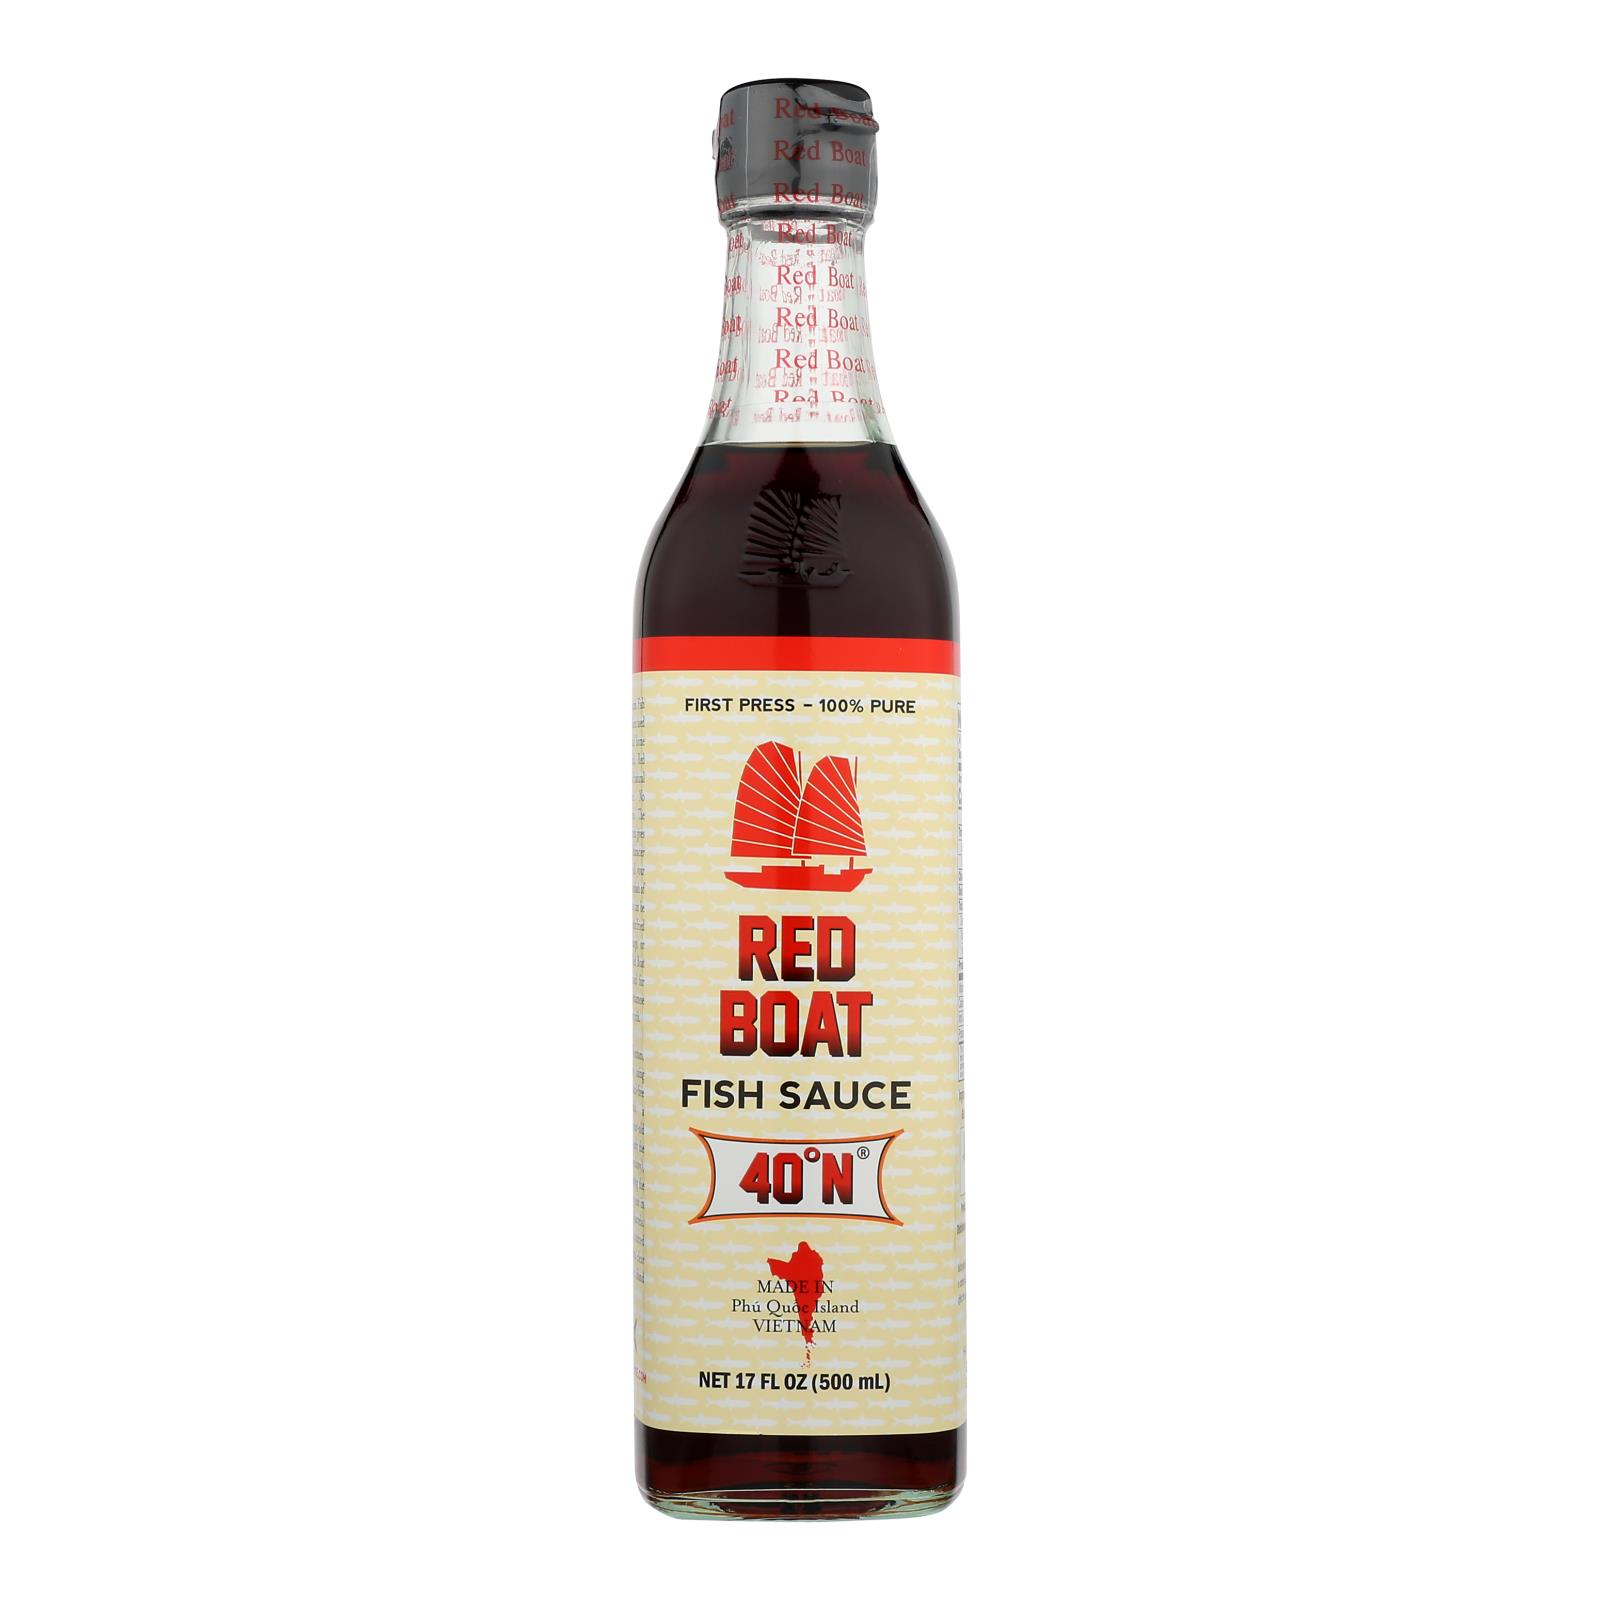 Red Boat Fish Sauce's Primary Ingredient - 12개 묶음상품 - 17 OZ